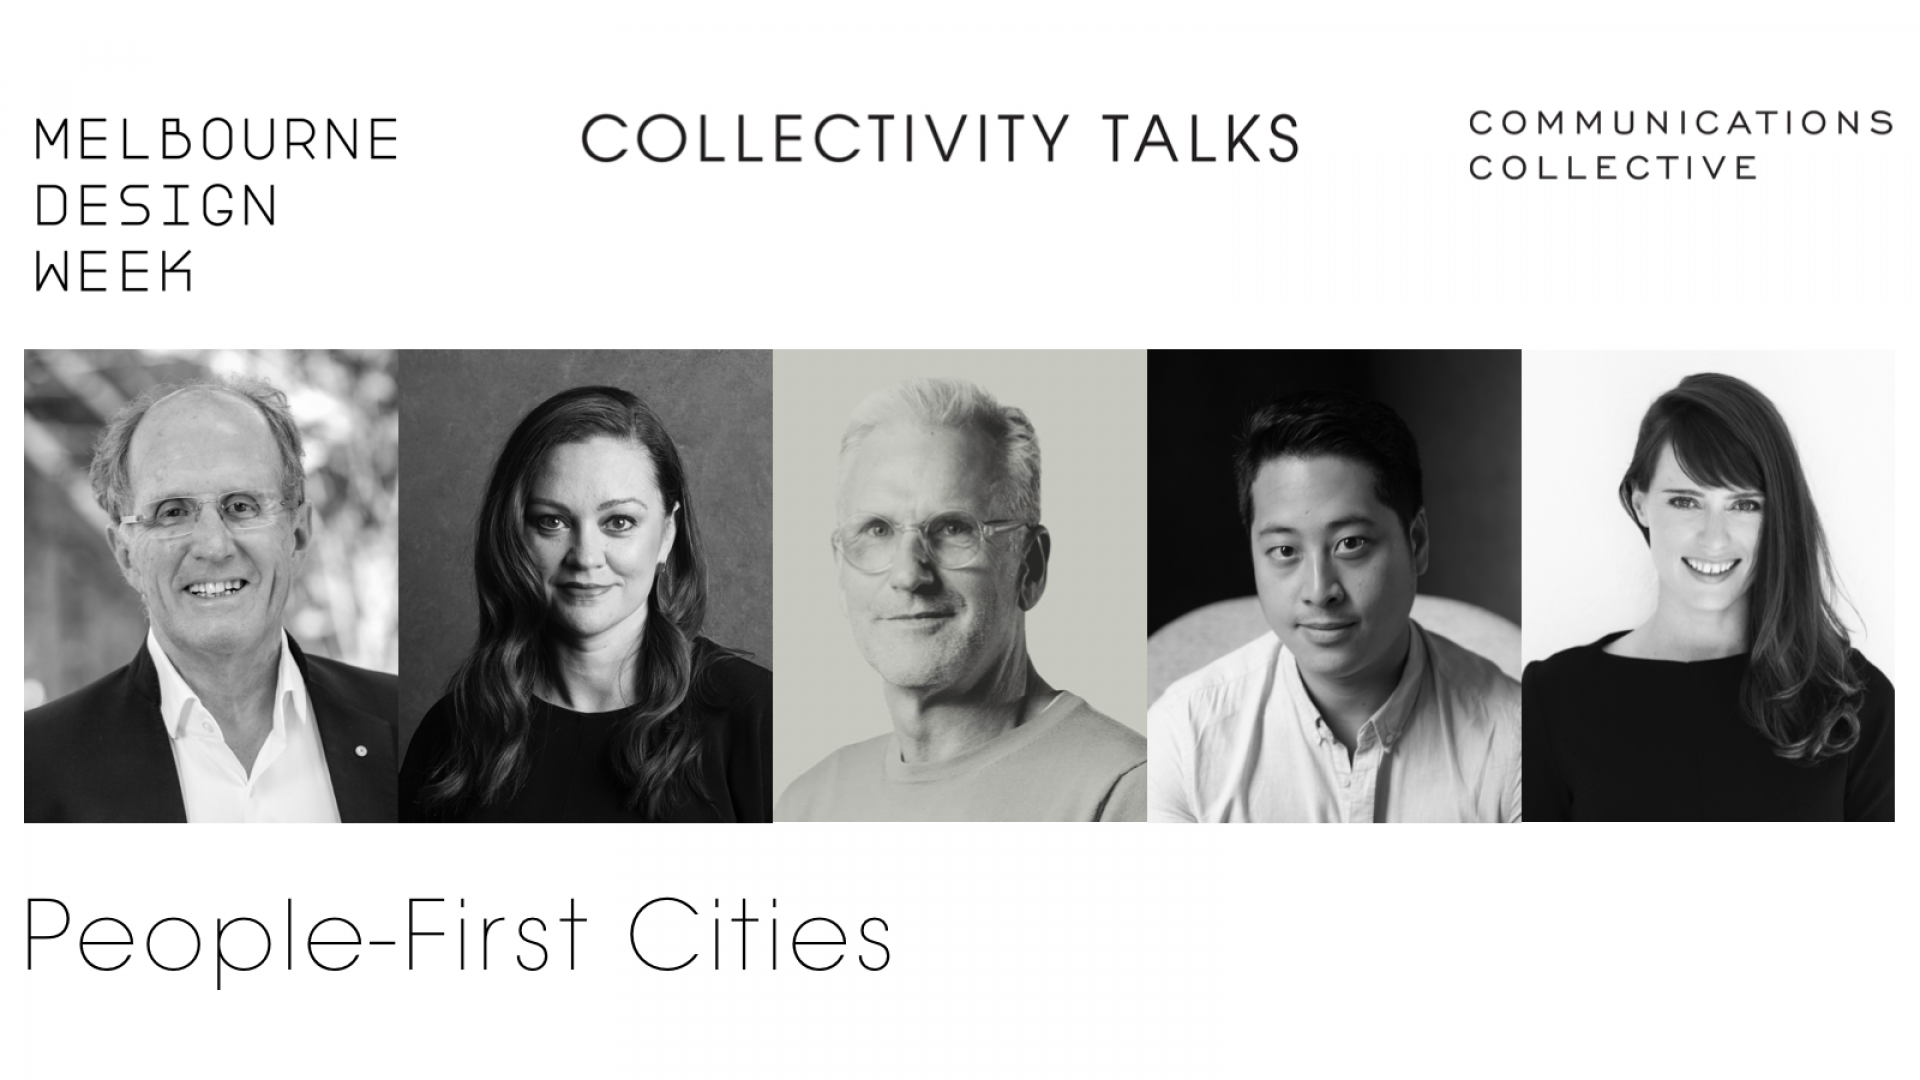 Image of Collectivity Talks: People-first cities panellists. From left to right = Rob Adams design director at City of Melbourne, Nicky Drobis, director at Fender Katsalidis, Mark Janetzki, creative director at Diadem, David Lee, director at Riverlee, and panel moderator Genevieve Brannigan, director at Communications Collective.